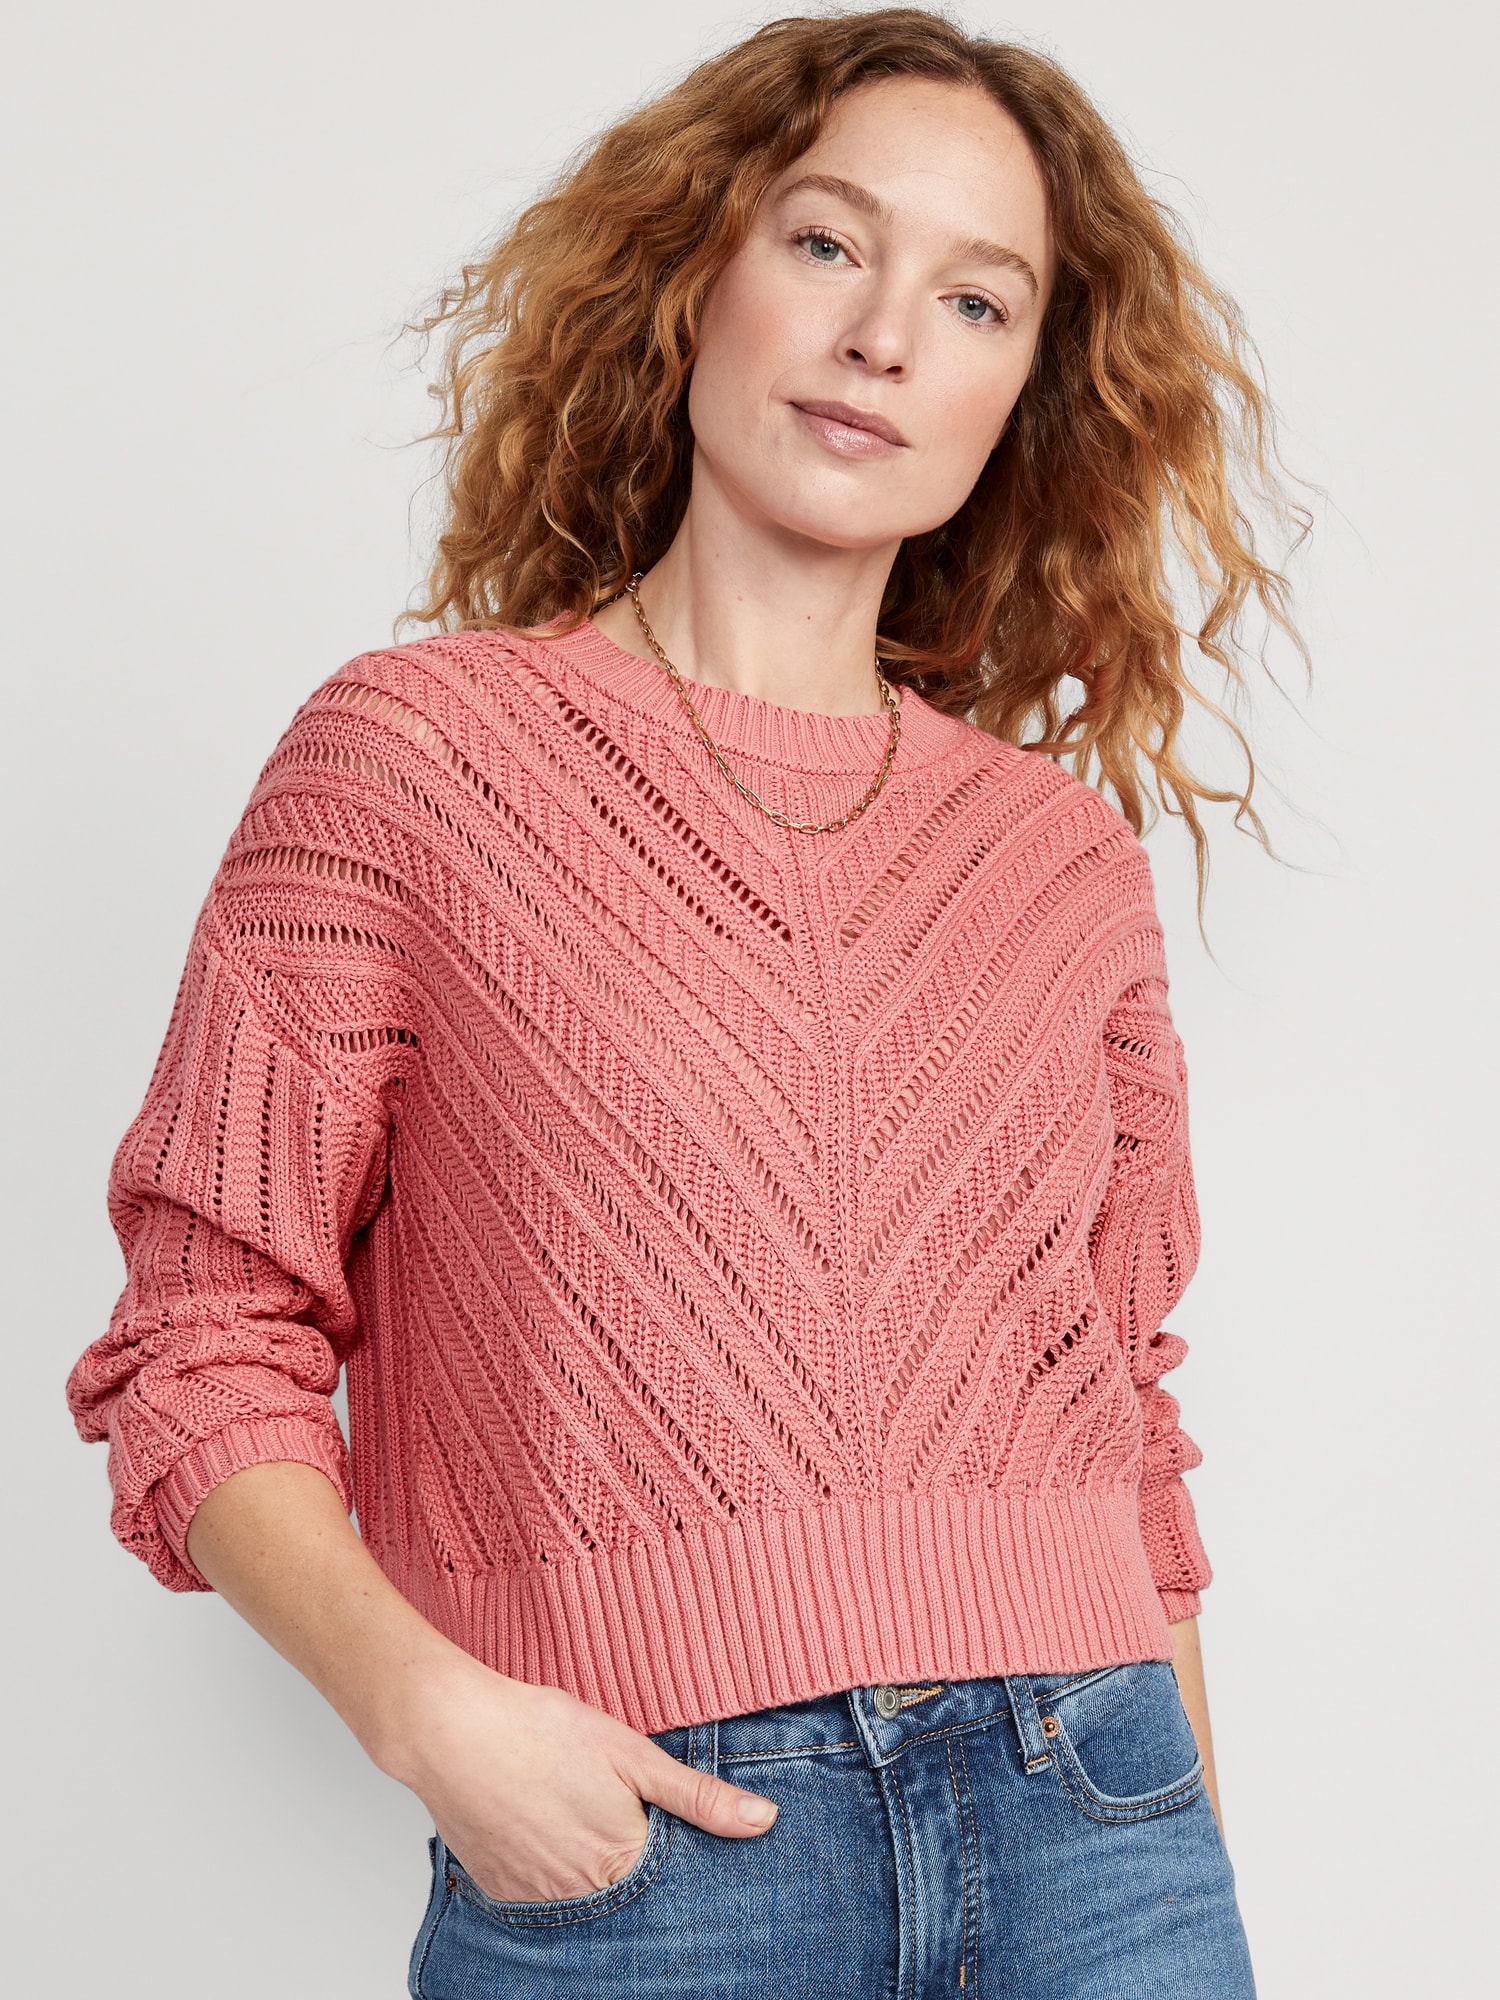 Old Navy Cropped Chevron Open-Knit Sweater for Women pink. 1